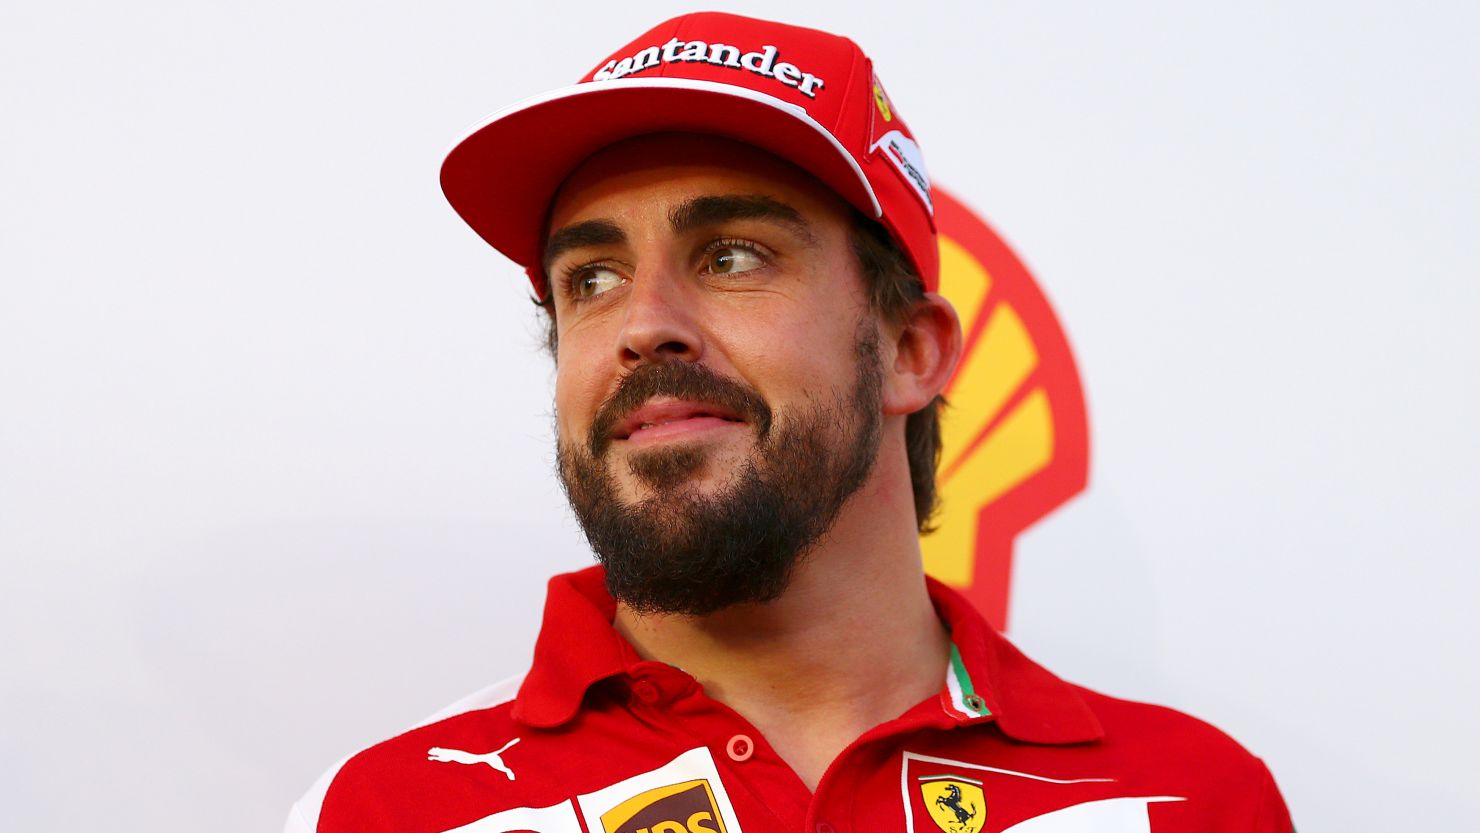 Two-time world champion Fernando Alonso is still waiting for his first win of the 2014 Formula One season.